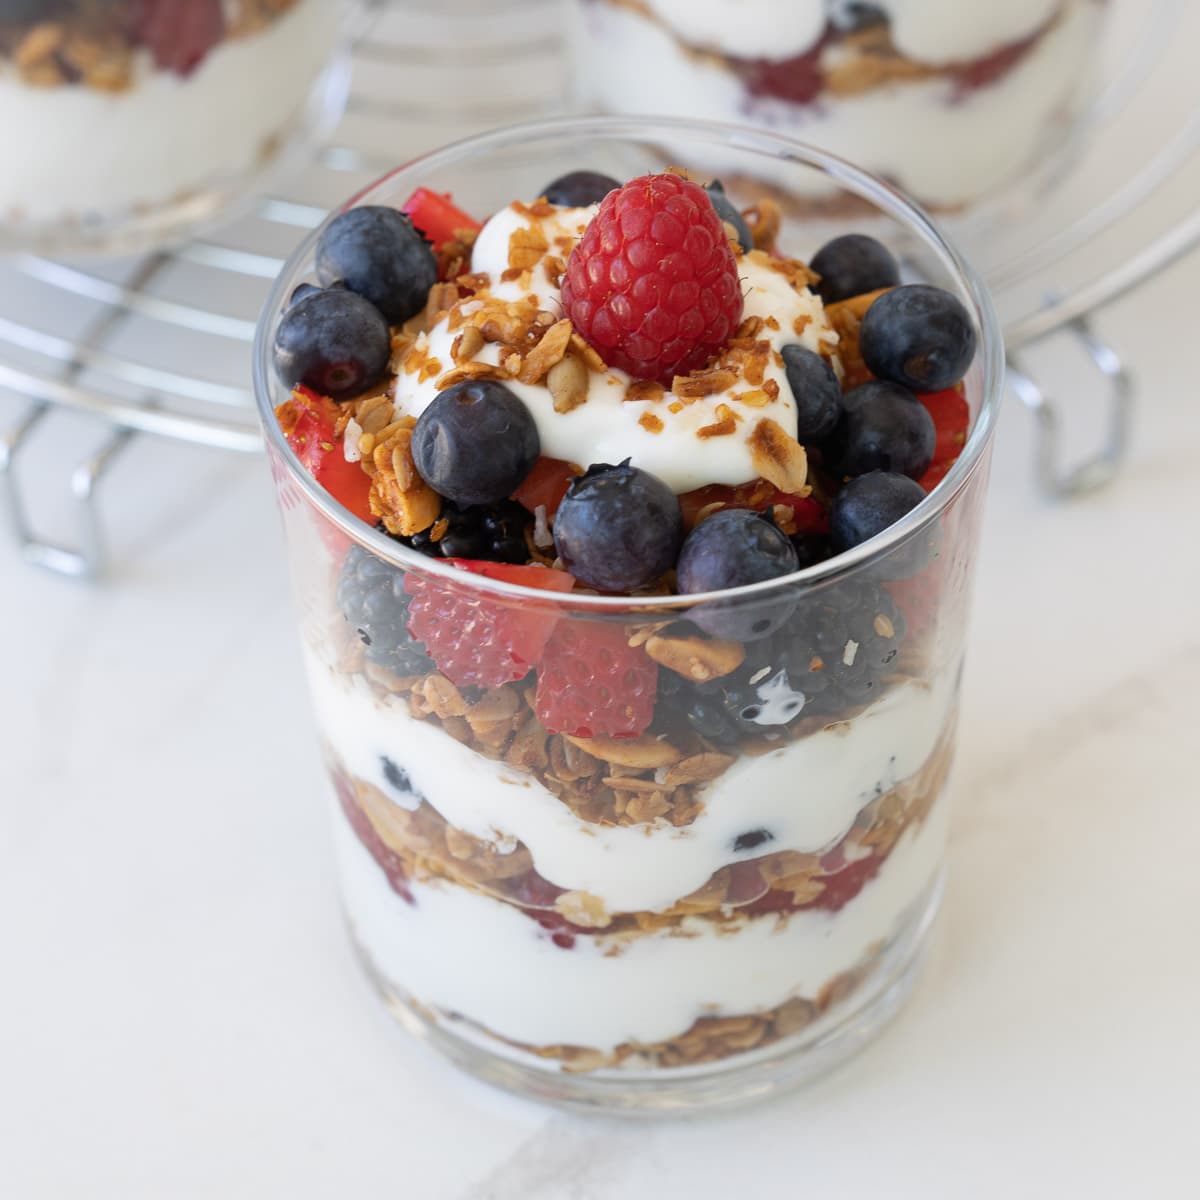 A single yogurt breakfast parfait with layers of fruit, granola, and yogurt in a clear glass.